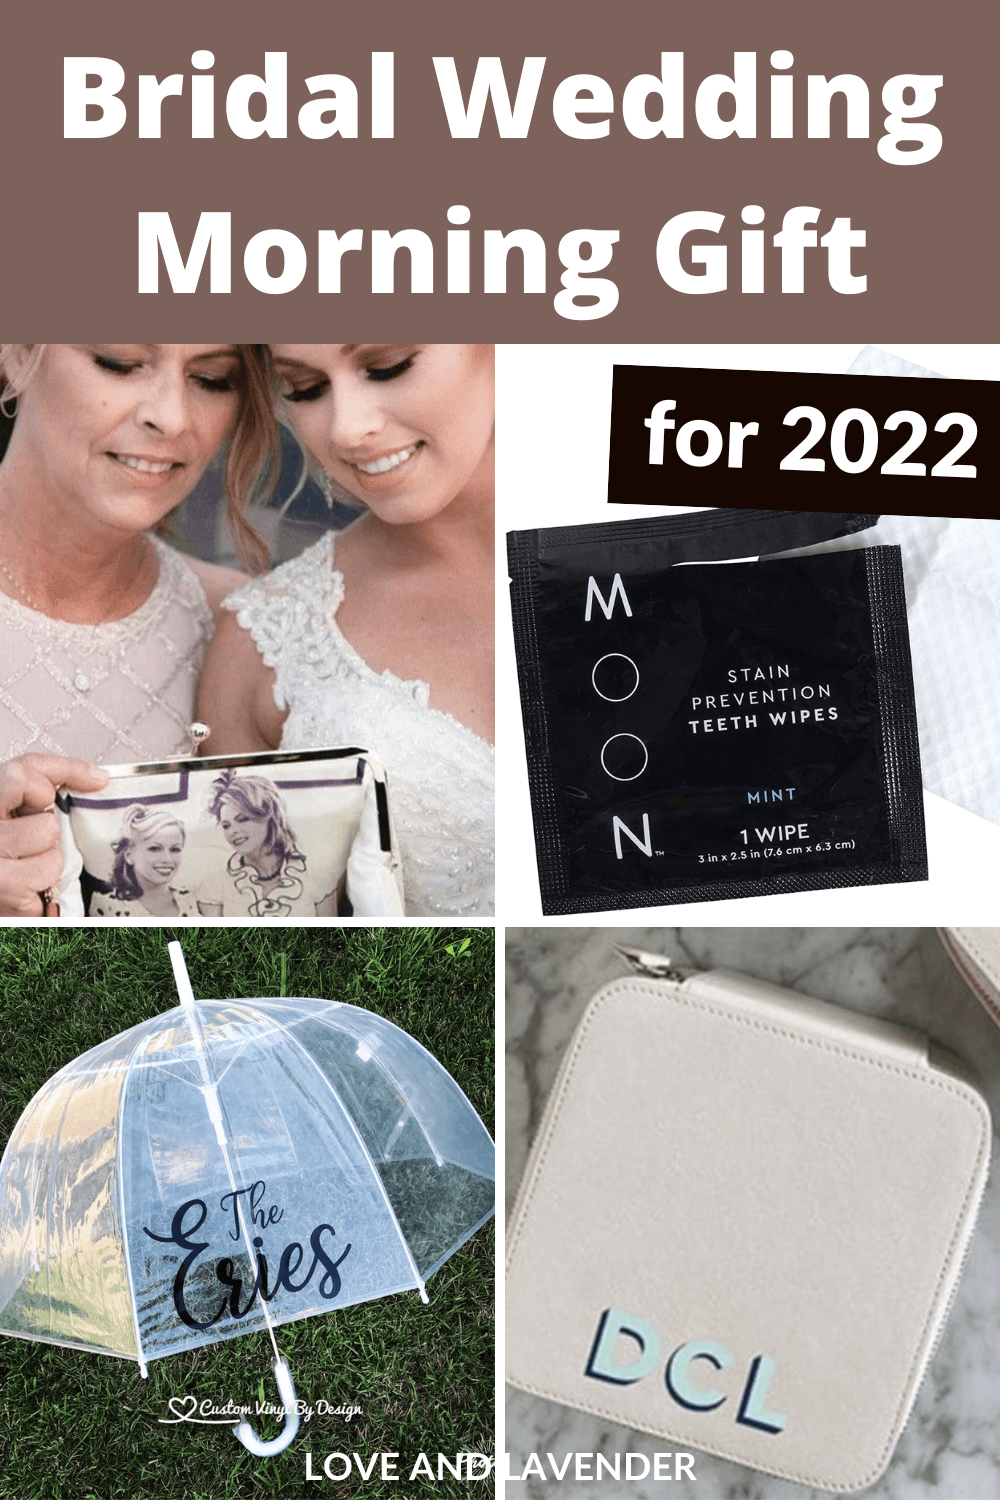 56 Day-of Wedding Morning Gifts for the Bride